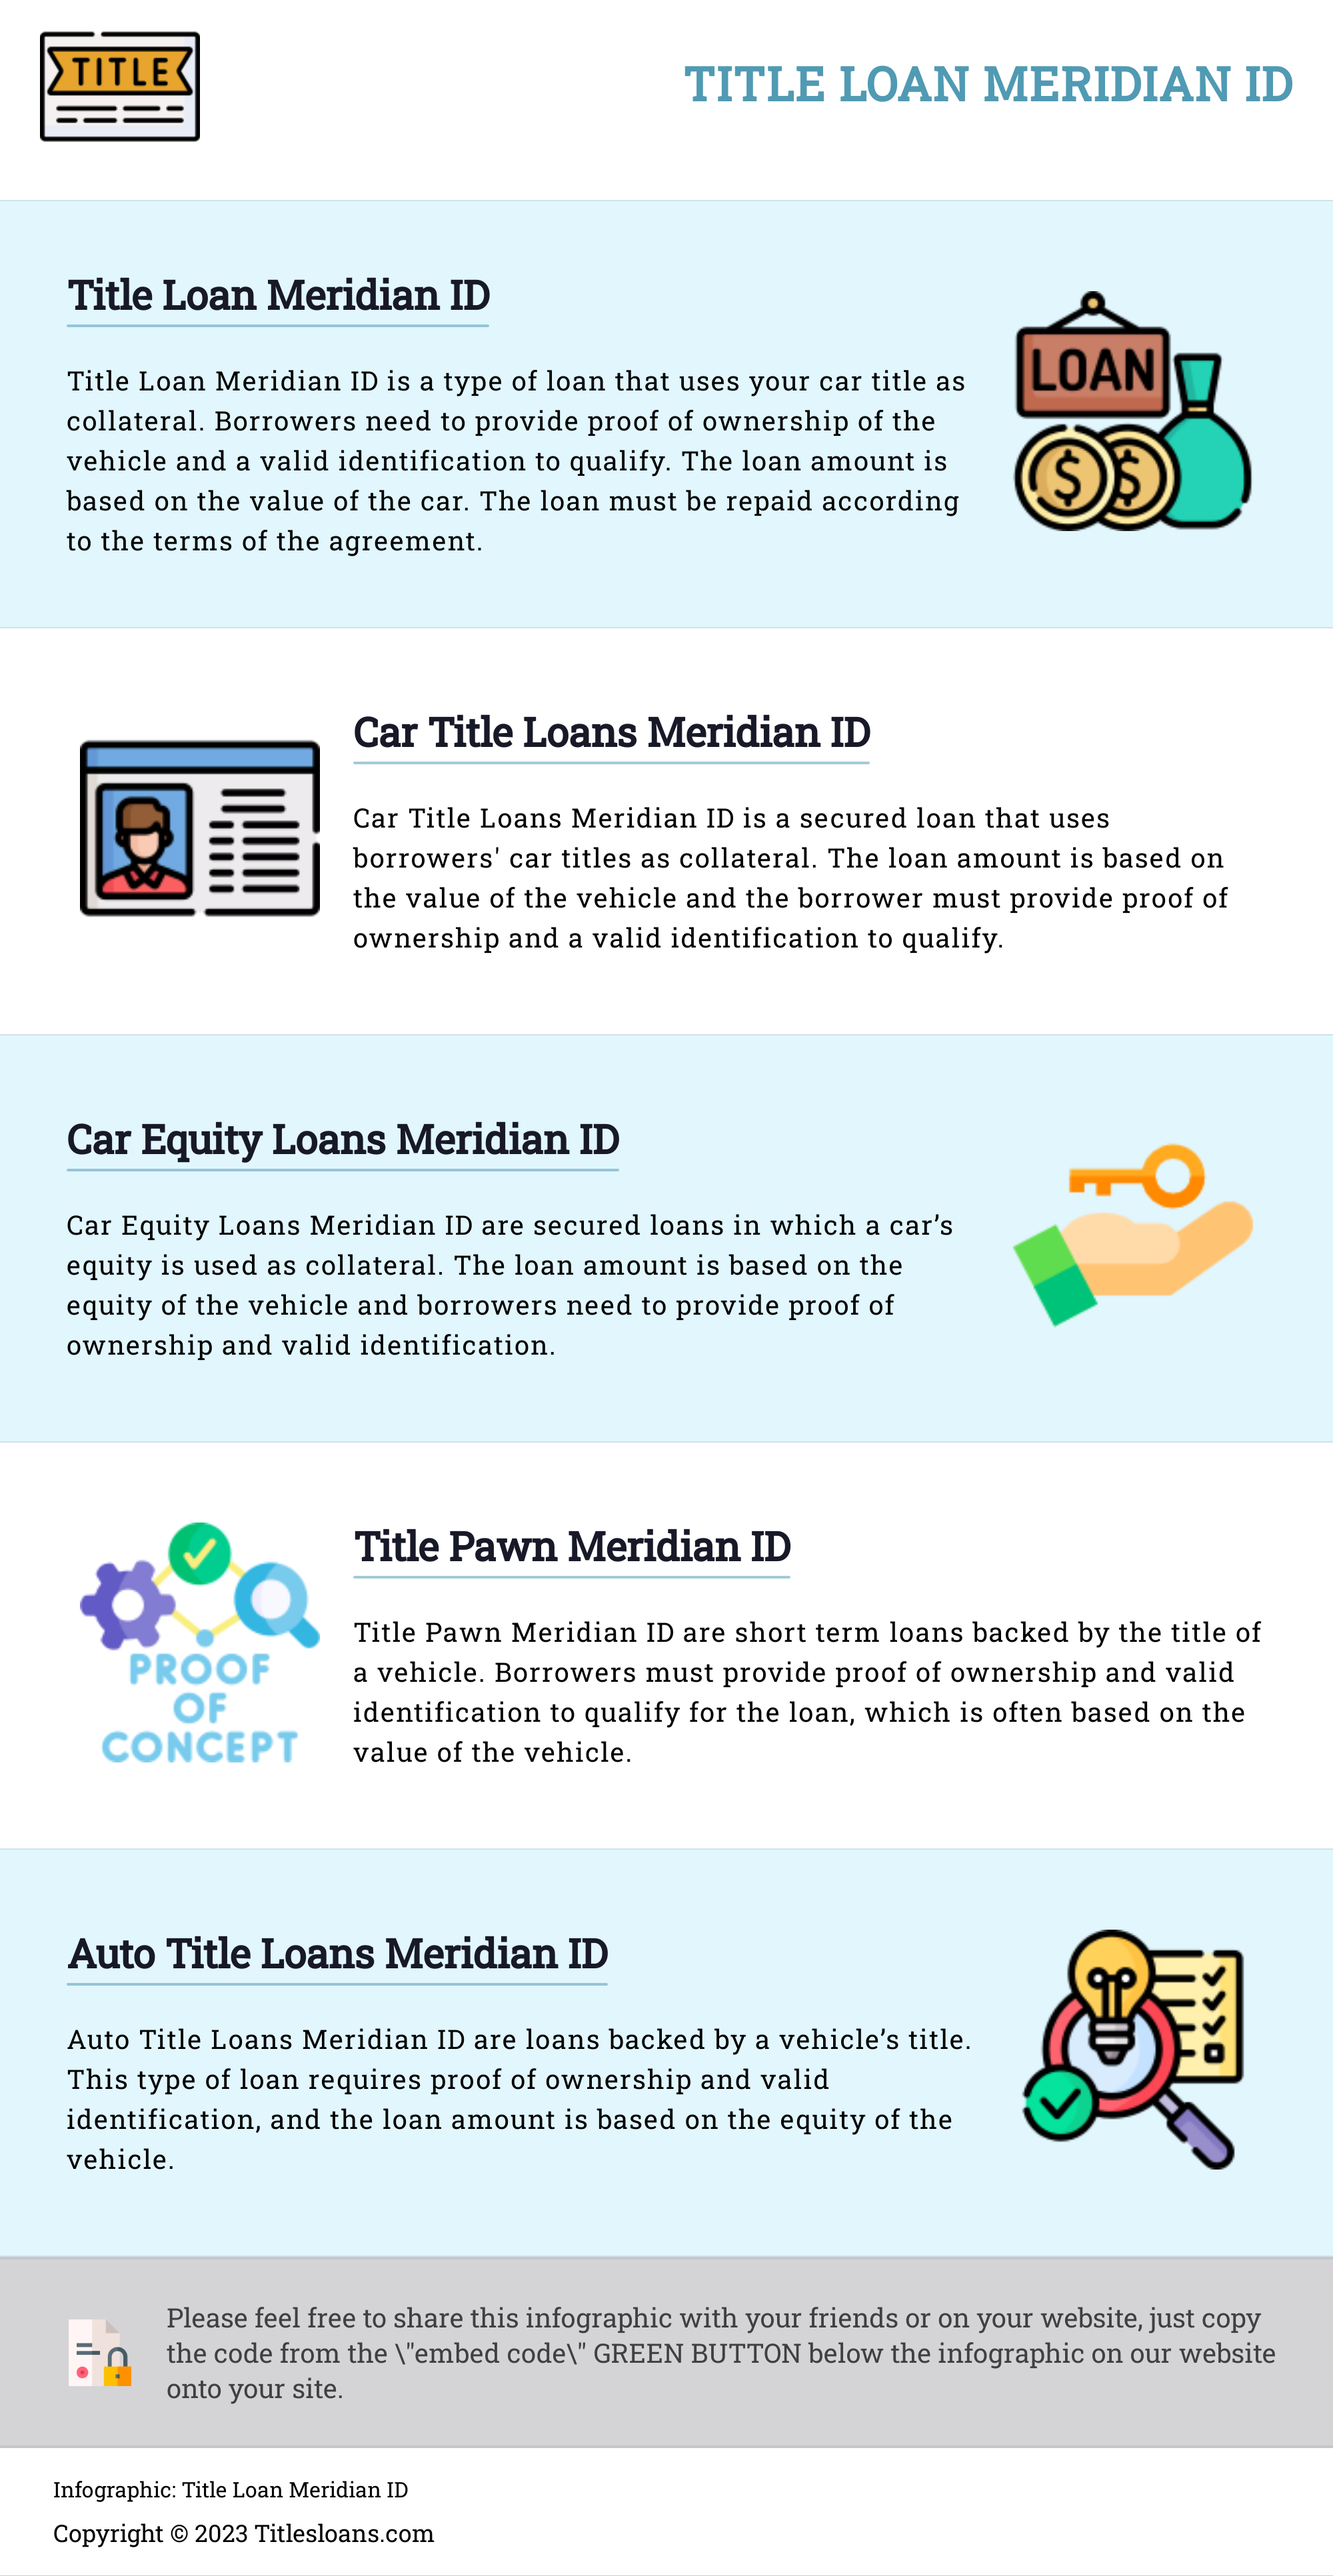 Infographic: Title Loan Meridian ID  